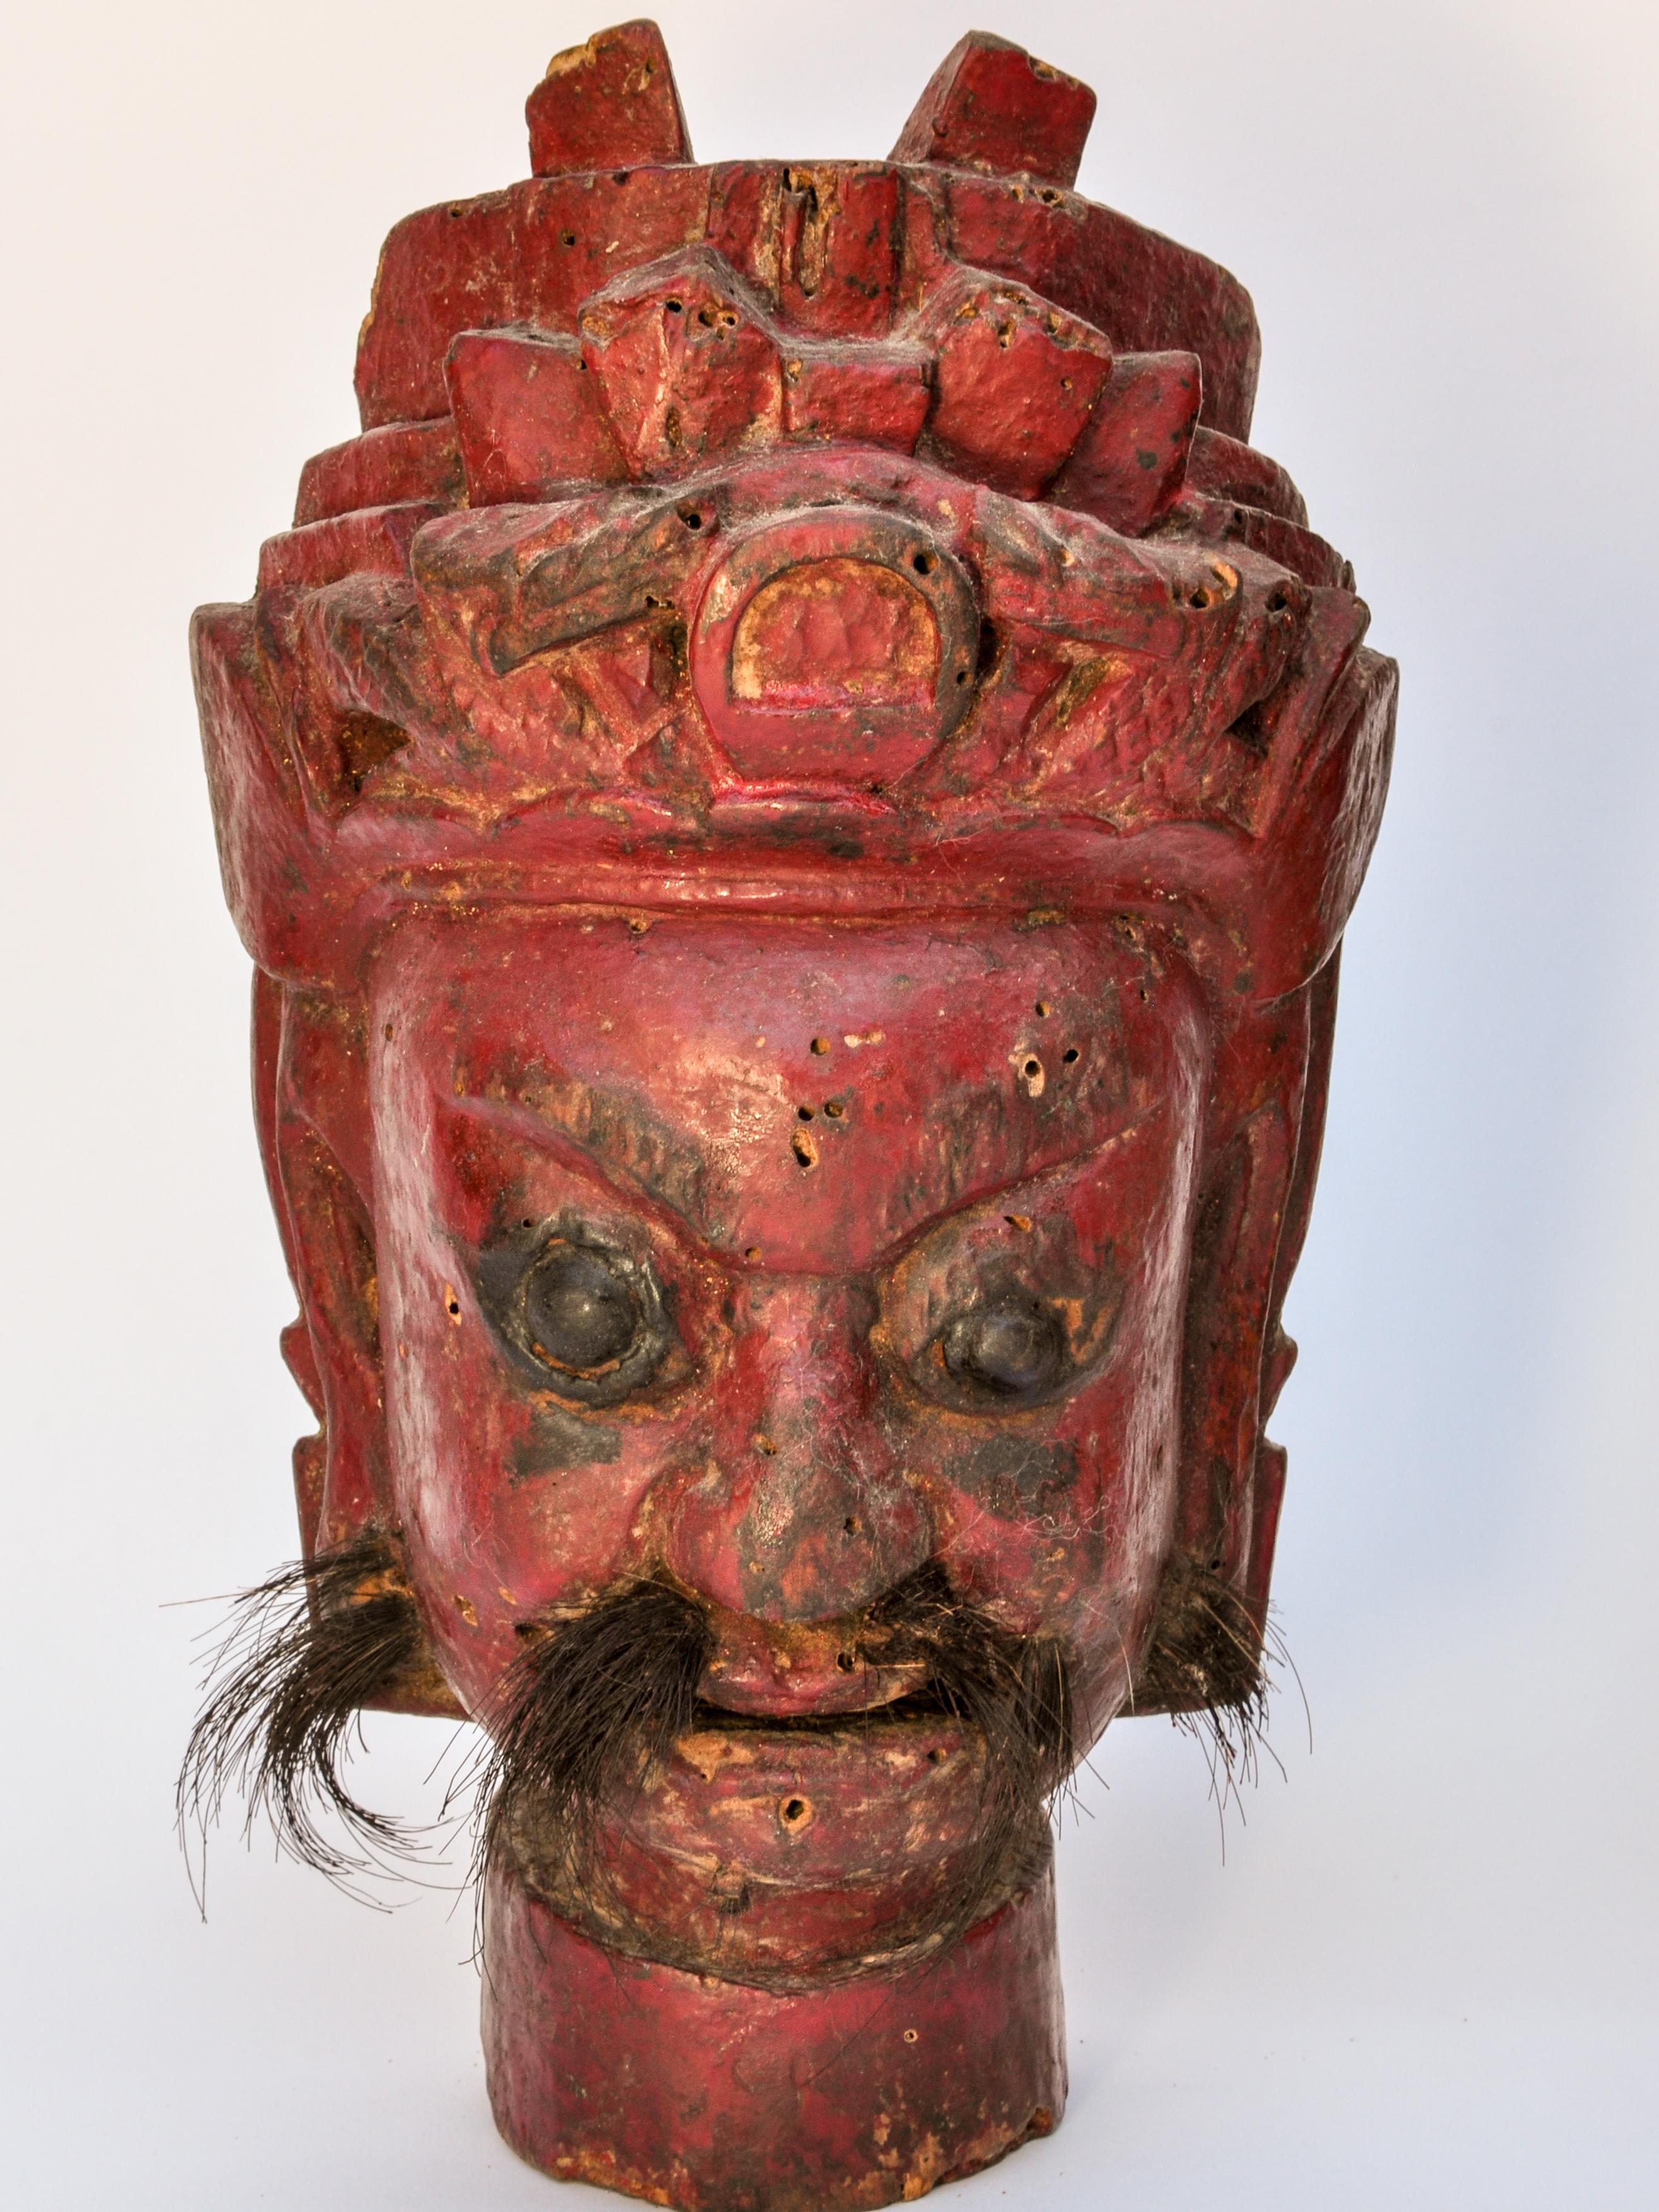 Nuo Gong and Nuo Mu Ancestor sculptures from Guizhou Province, China, 19th century or earlier.
Nuo Gong and Nuo Mu are the Father and the Mother of the Nuo Ceremony, and are considered the founding ancestors of the clan or village. The Nuo ceremony